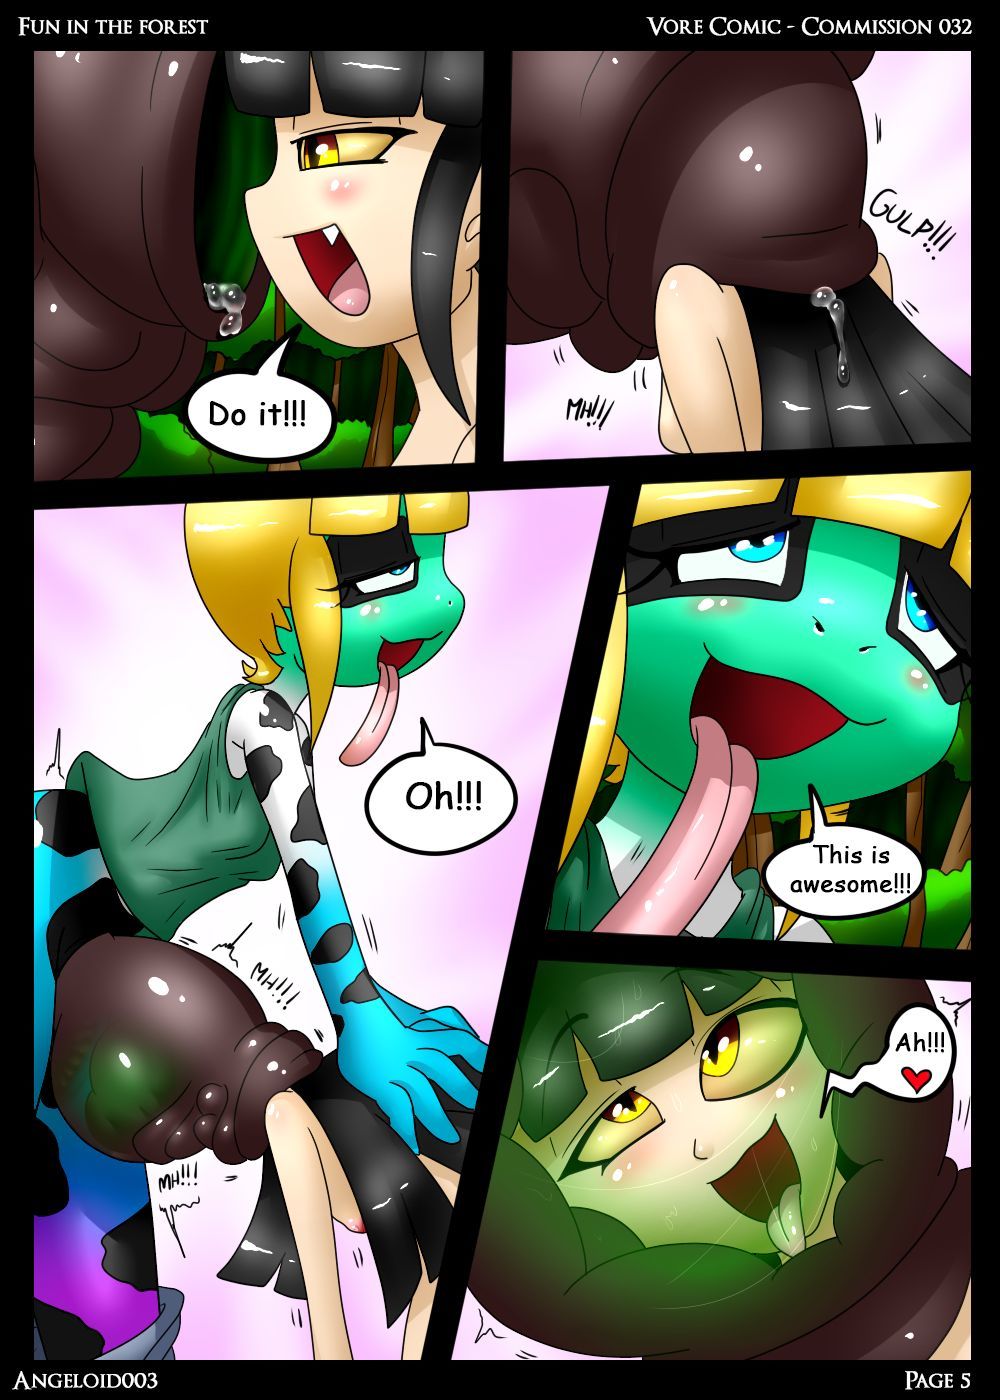 Fun in the Forest - Comm032 Angeloid003 page 5